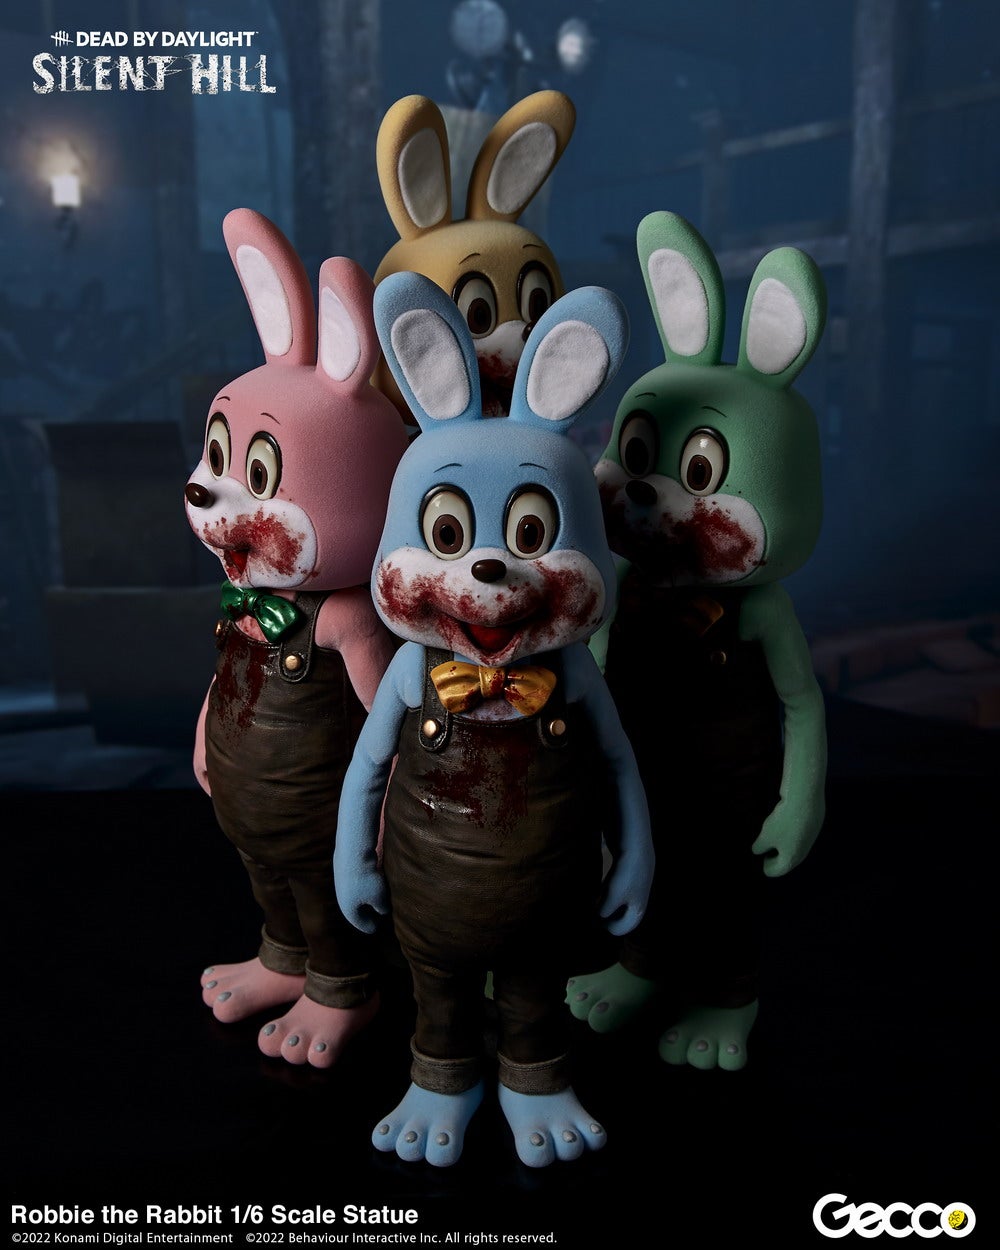 Hot Topic Gecco Silent Hill X Dead By Daylight Robbie The Rabbit